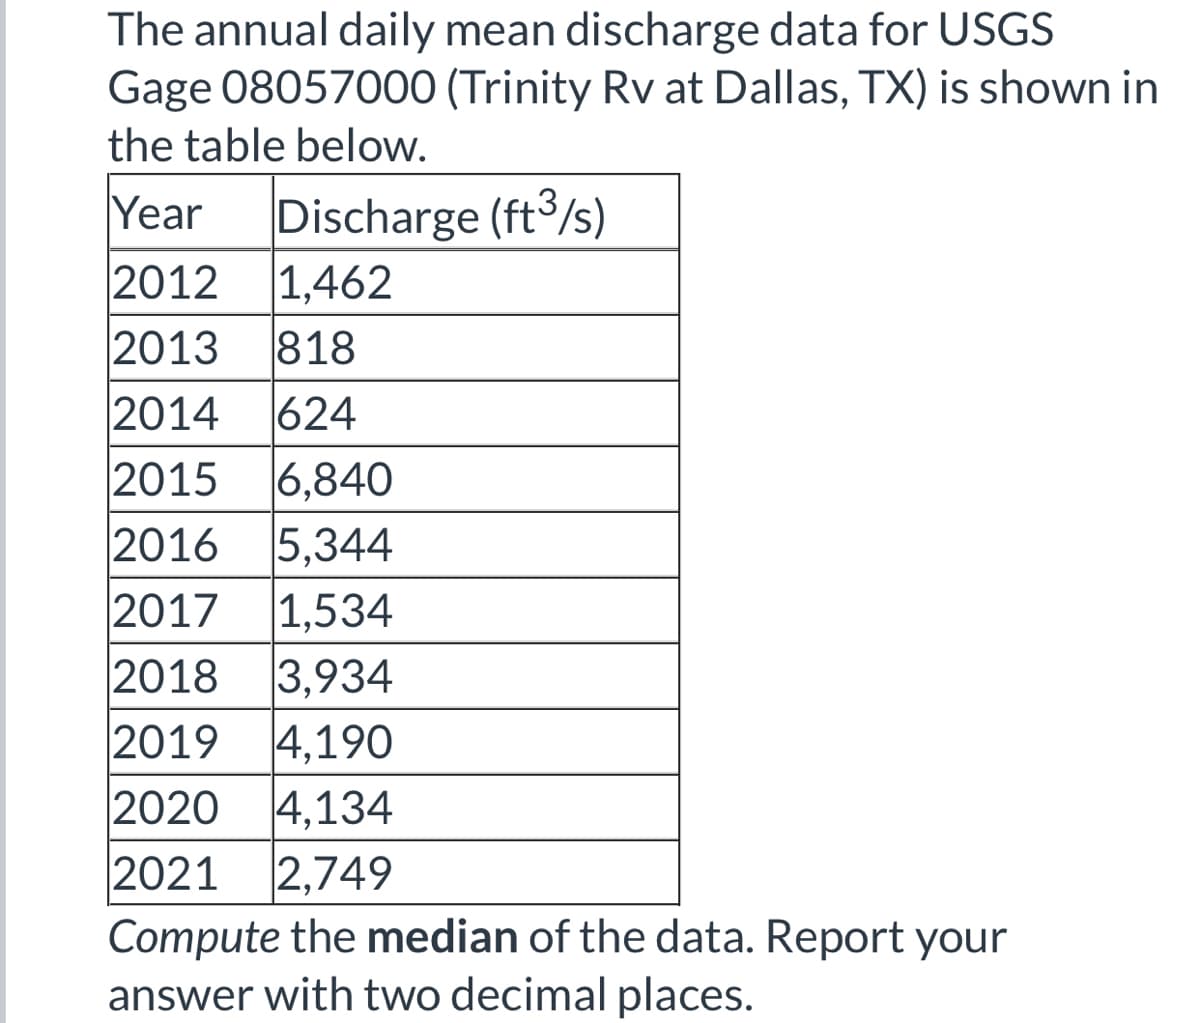 The annual daily mean discharge data for USGS
08057000 (Trinity Rv at Dallas, TX) is shown in
the table below.
Gage
Year Discharge (ft3/s)
2012 1,462
2013 818
2014 624
2015 6,840
2016 5,344
2017 1,534
2018 3,934
2019 4,190
2020 4,134
2021 2,749
Compute the median of the data. Report your
answer with two decimal places.